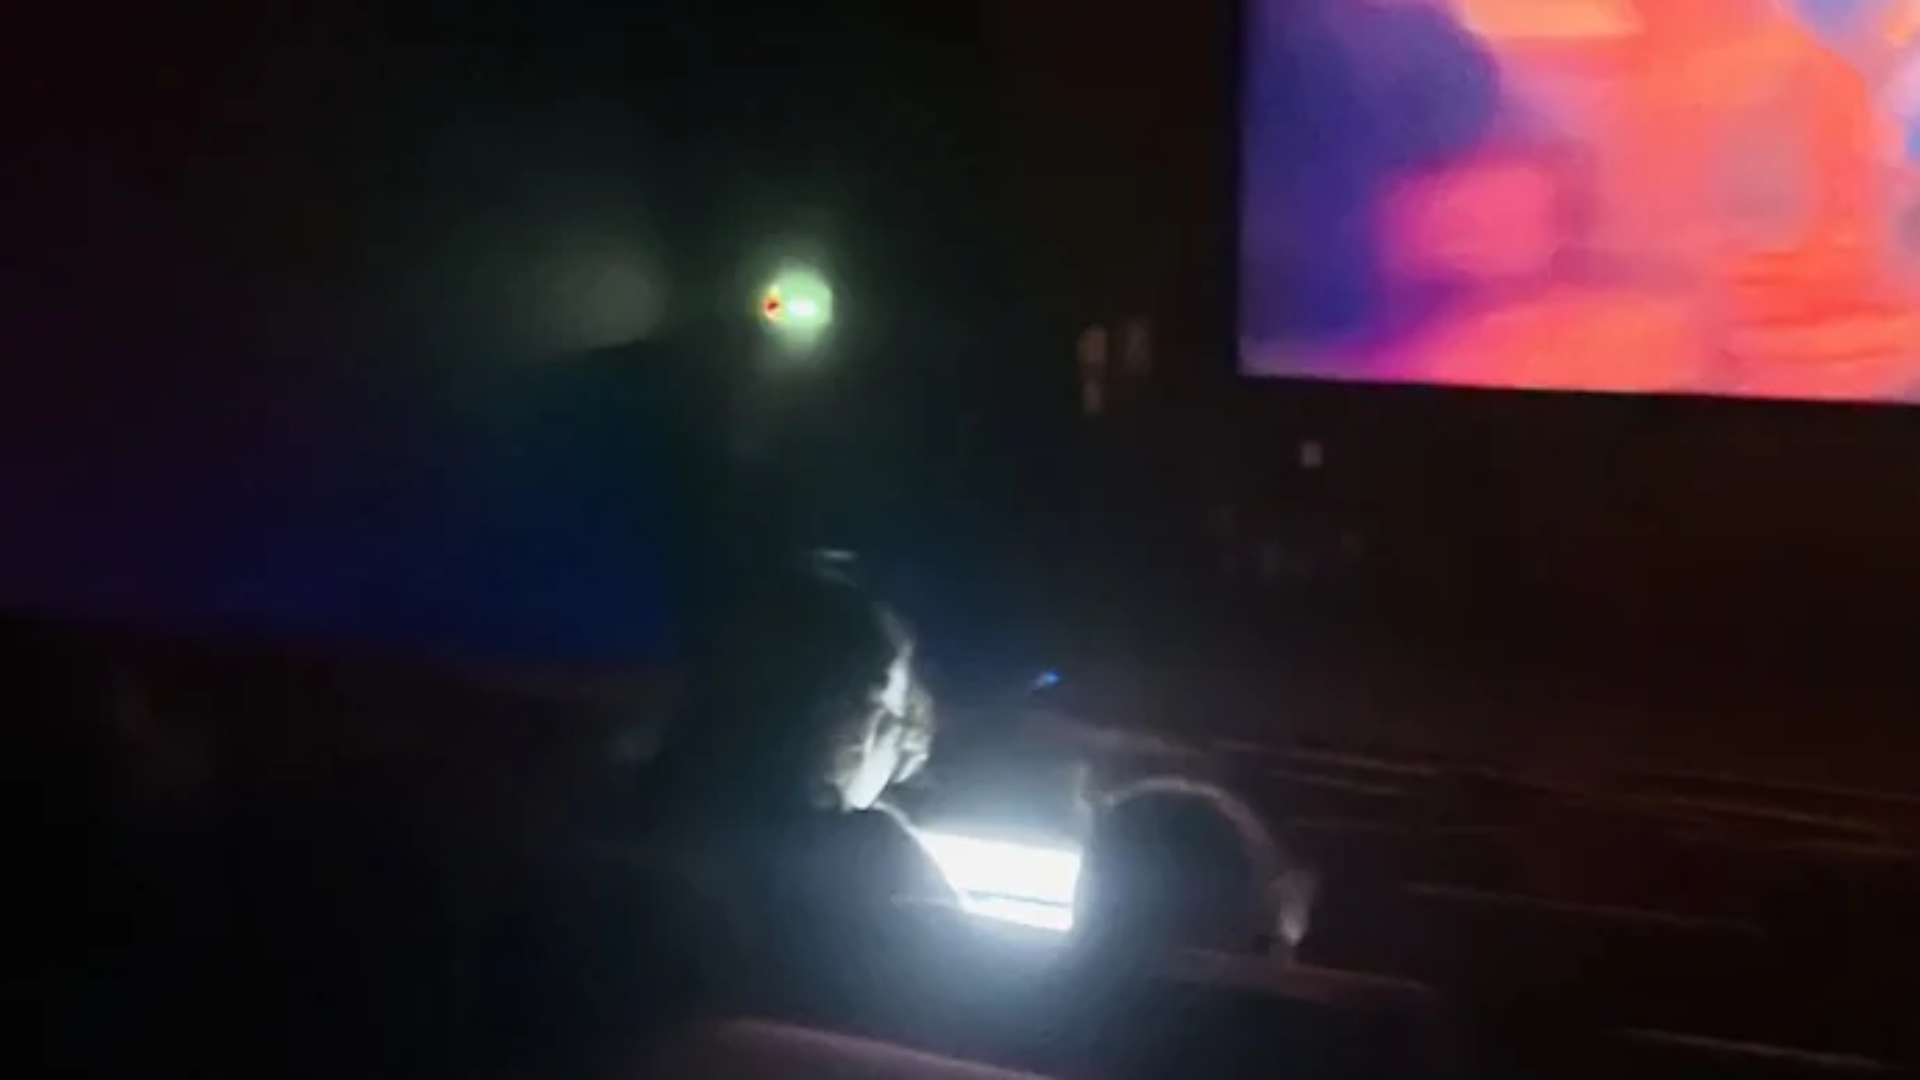 Bangalore: Man Spotted Working On Laptop In Theater